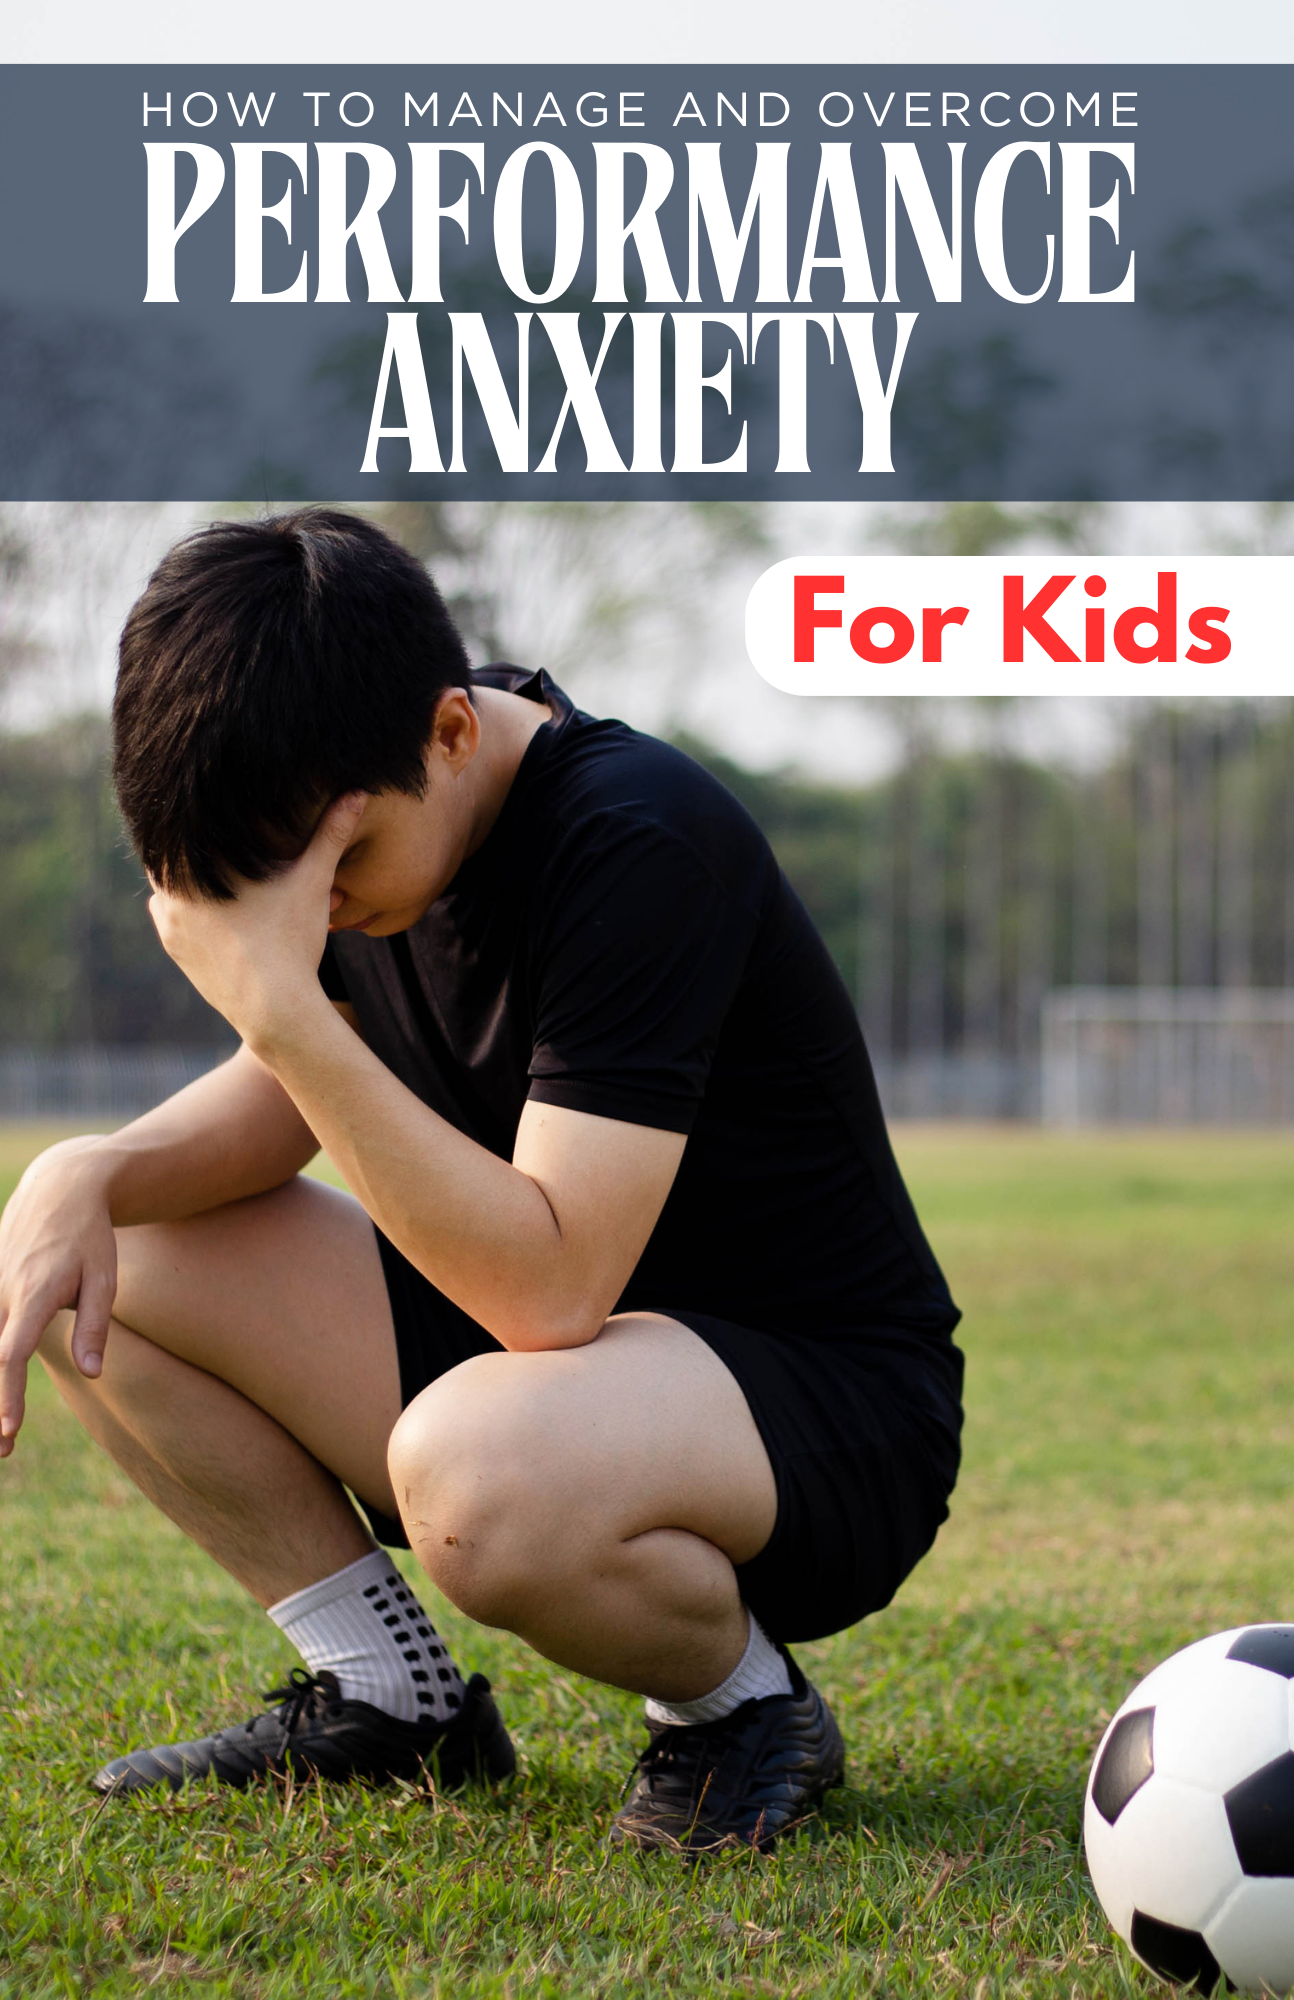 PERFORMANCE ANXIETY FOR KIDS: How to manage and overcome your anxiety